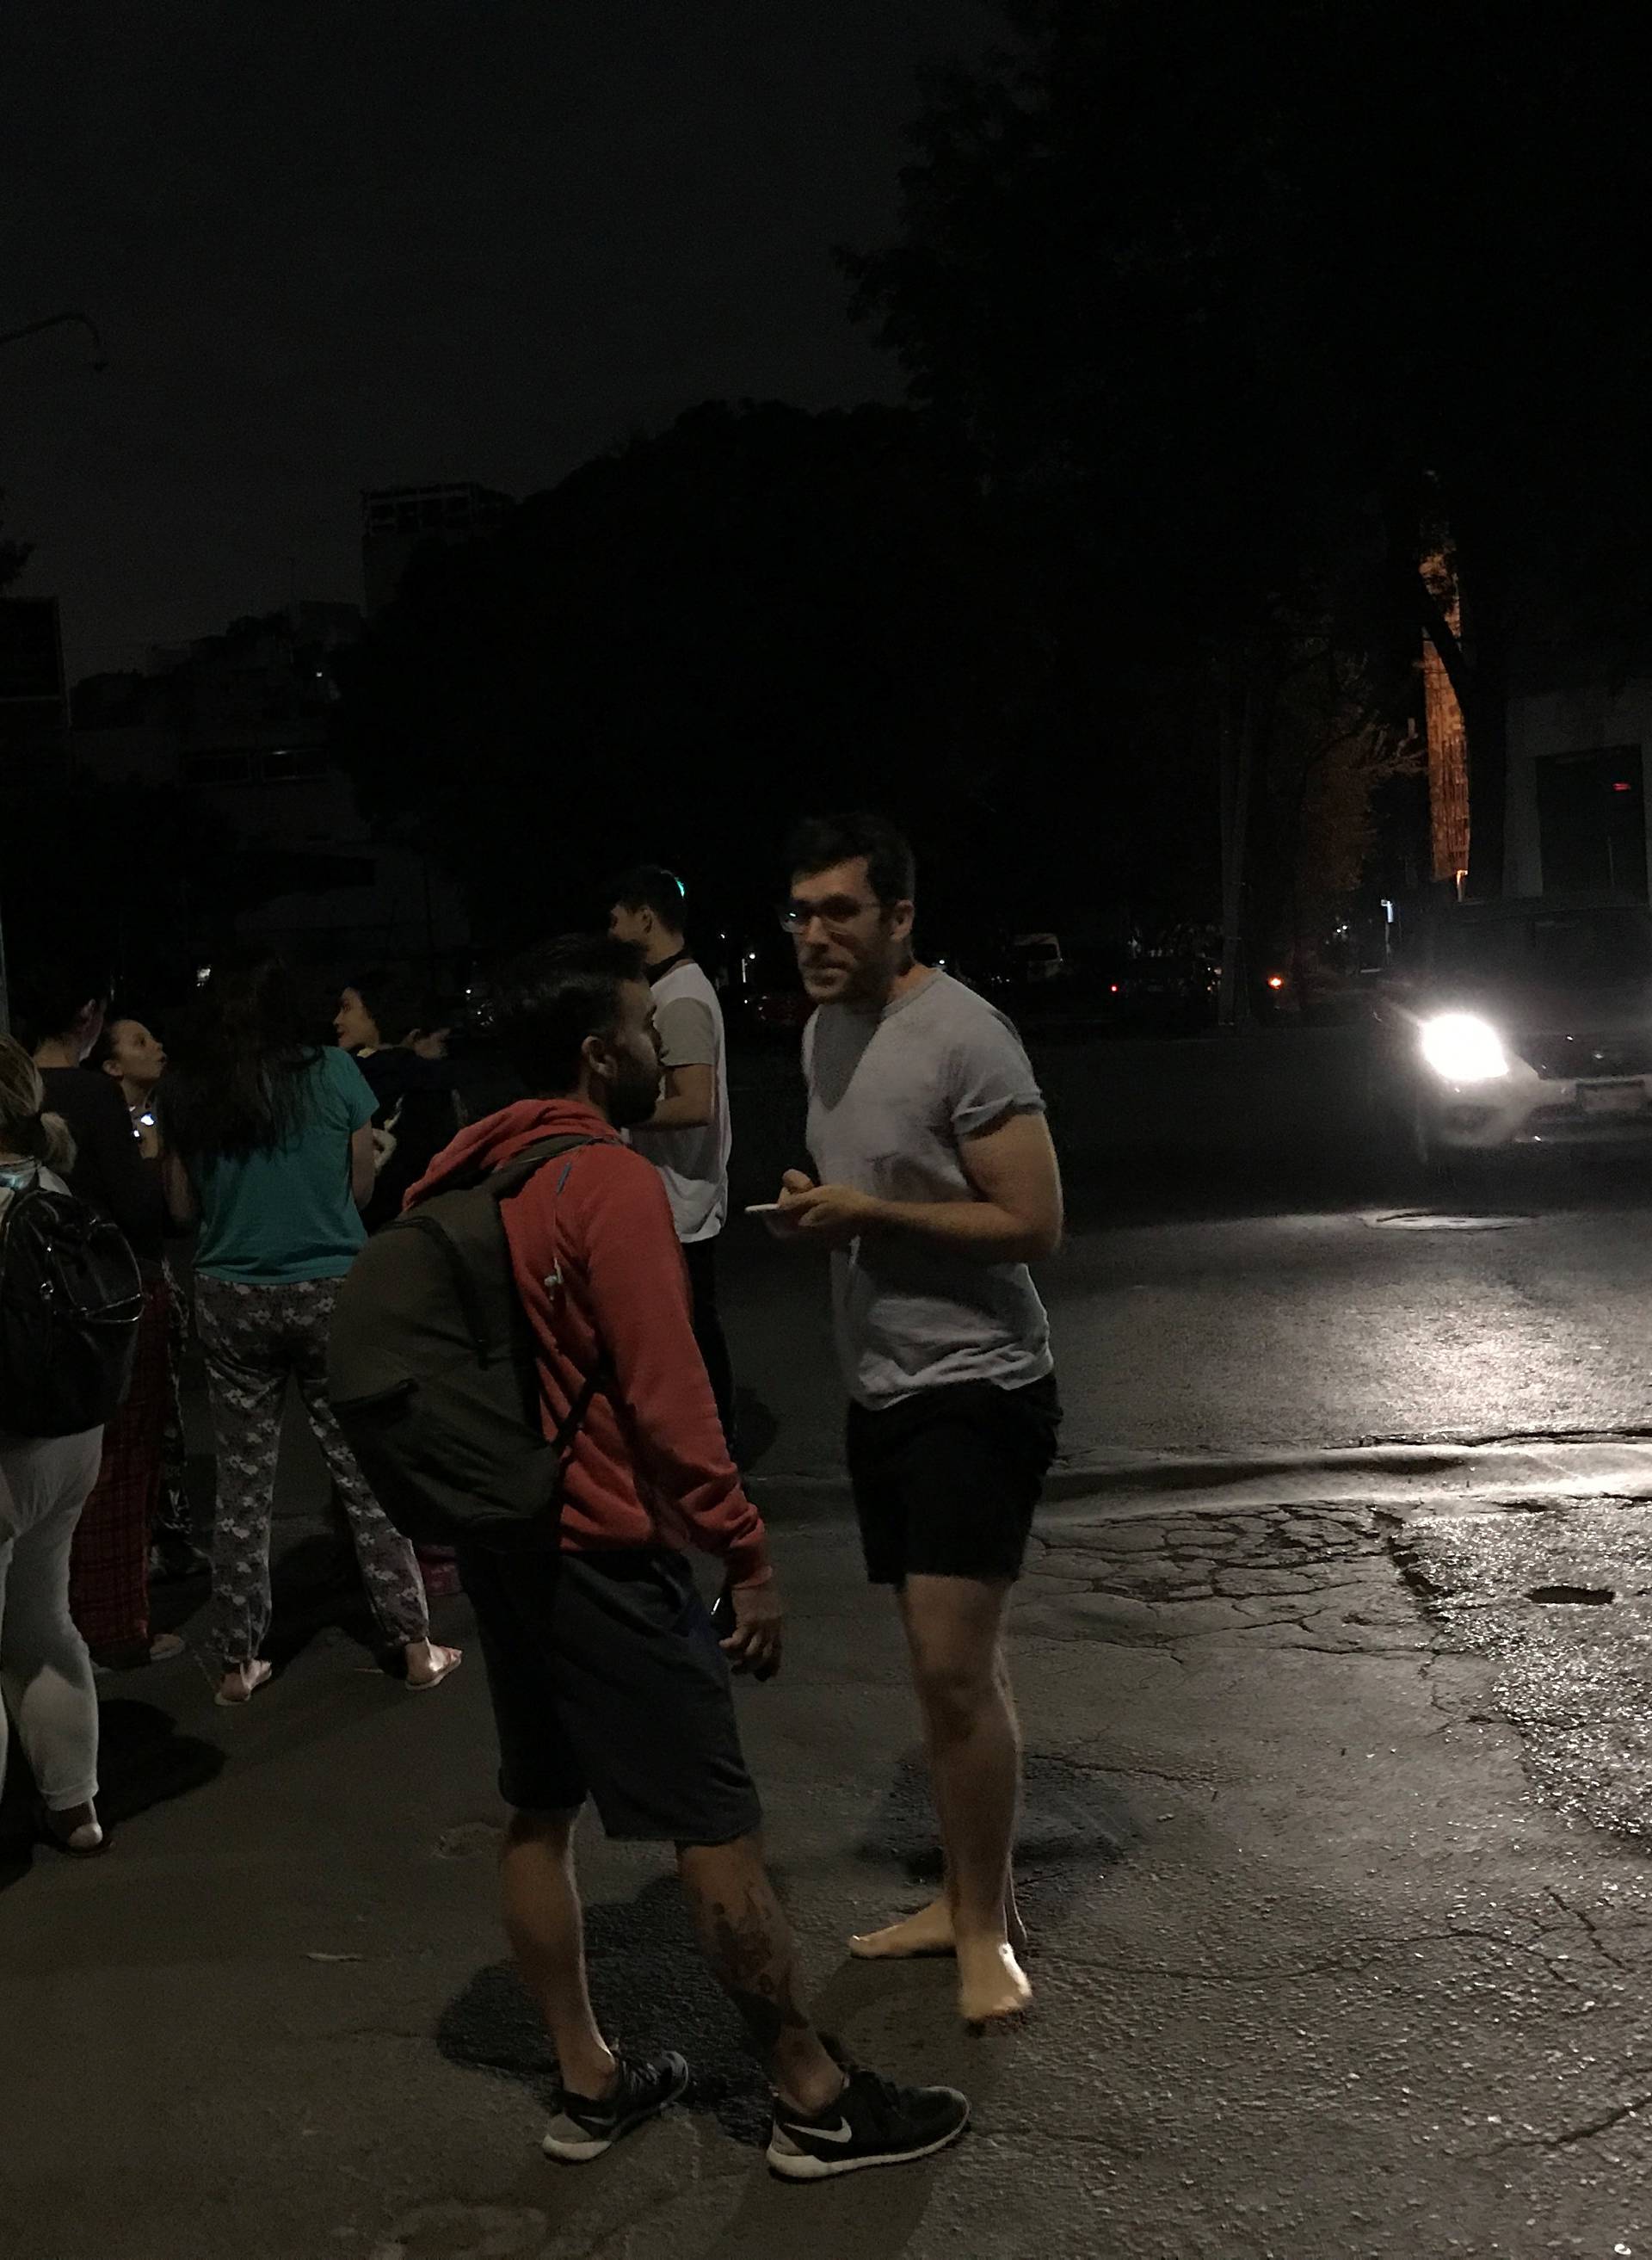 People gather on a street after an earthquake hit Mexico City